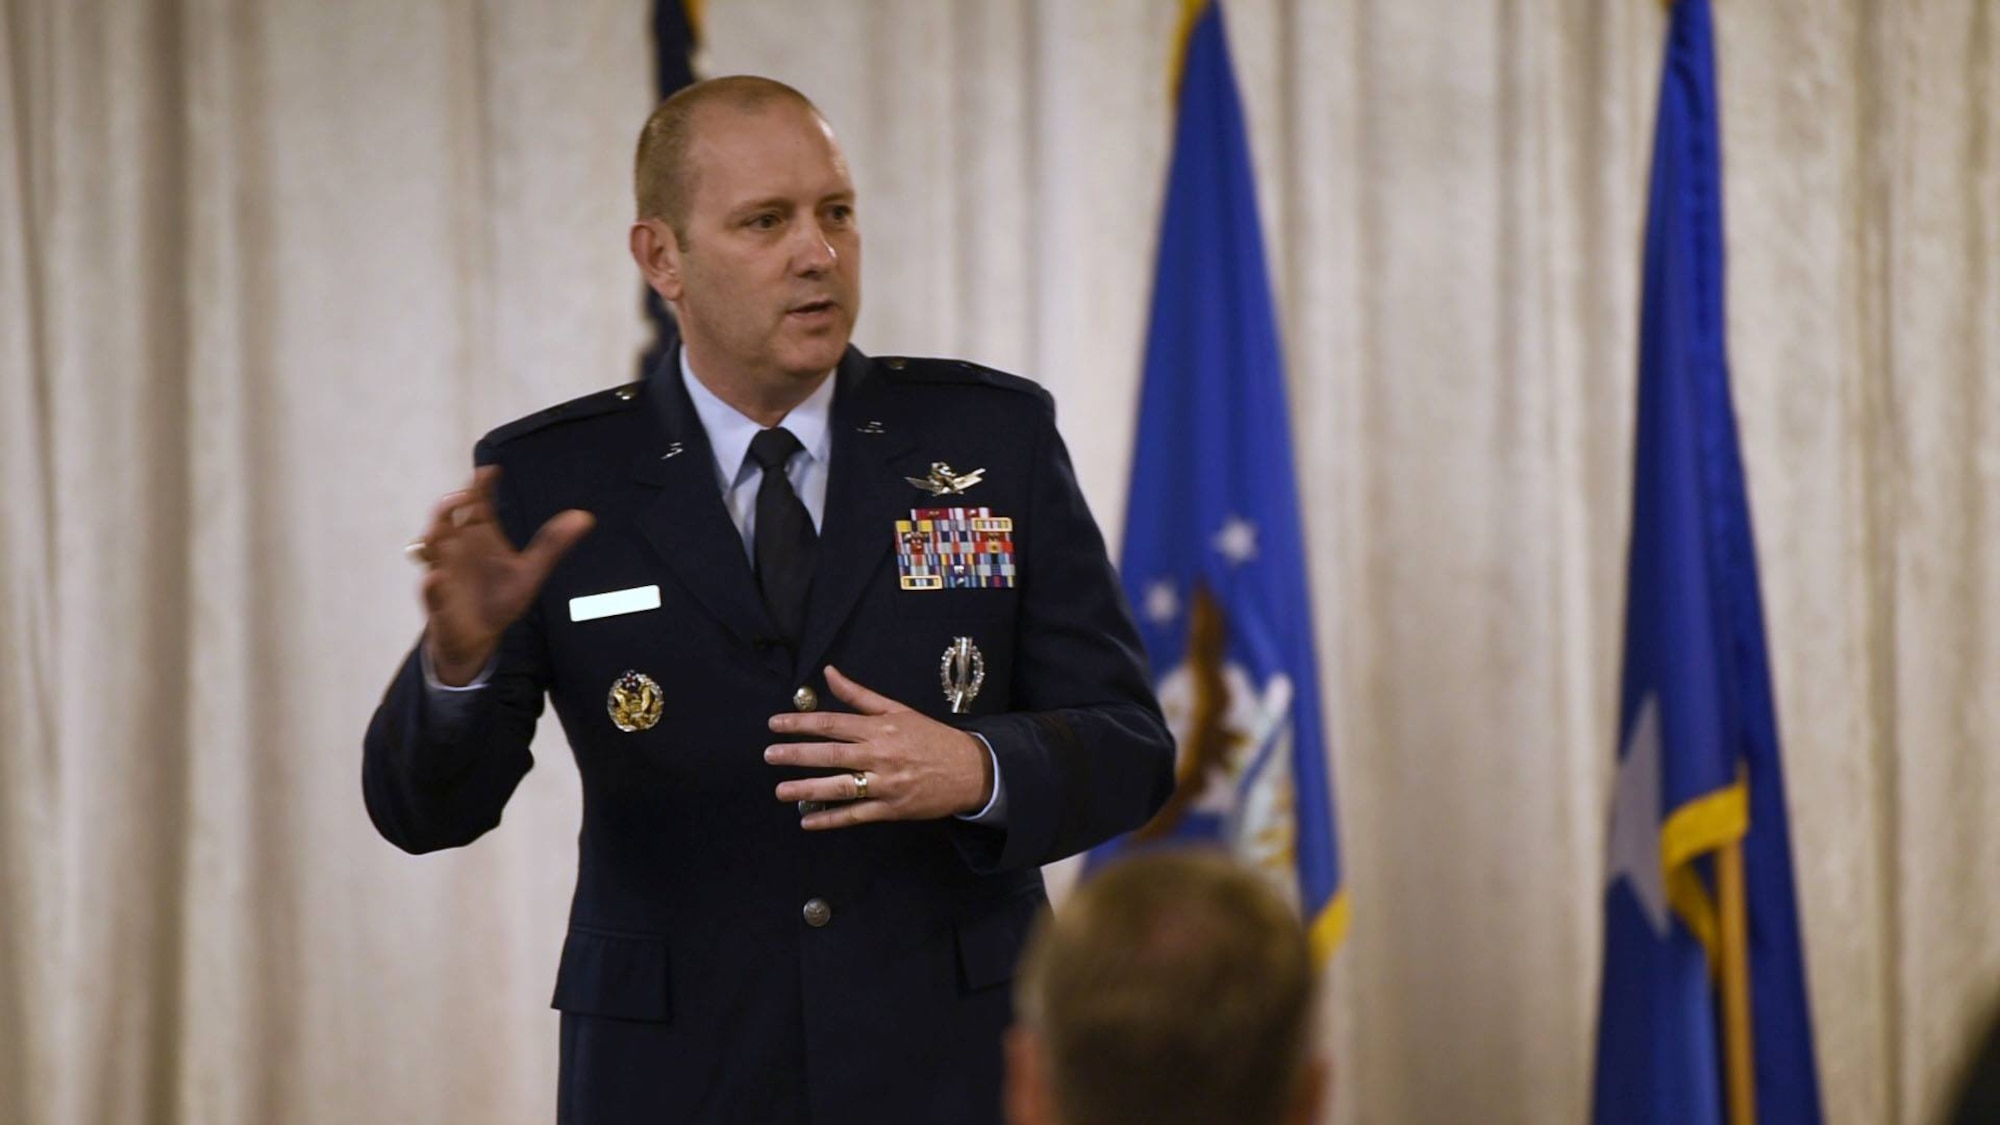 Brig. Gen. Doug Schiess, 45th Space Wing commander, spoke with community partners about current and future missions during the inaugural State of the Installation event at Patrick Air Force Base, Fla. on March 29, 2019.